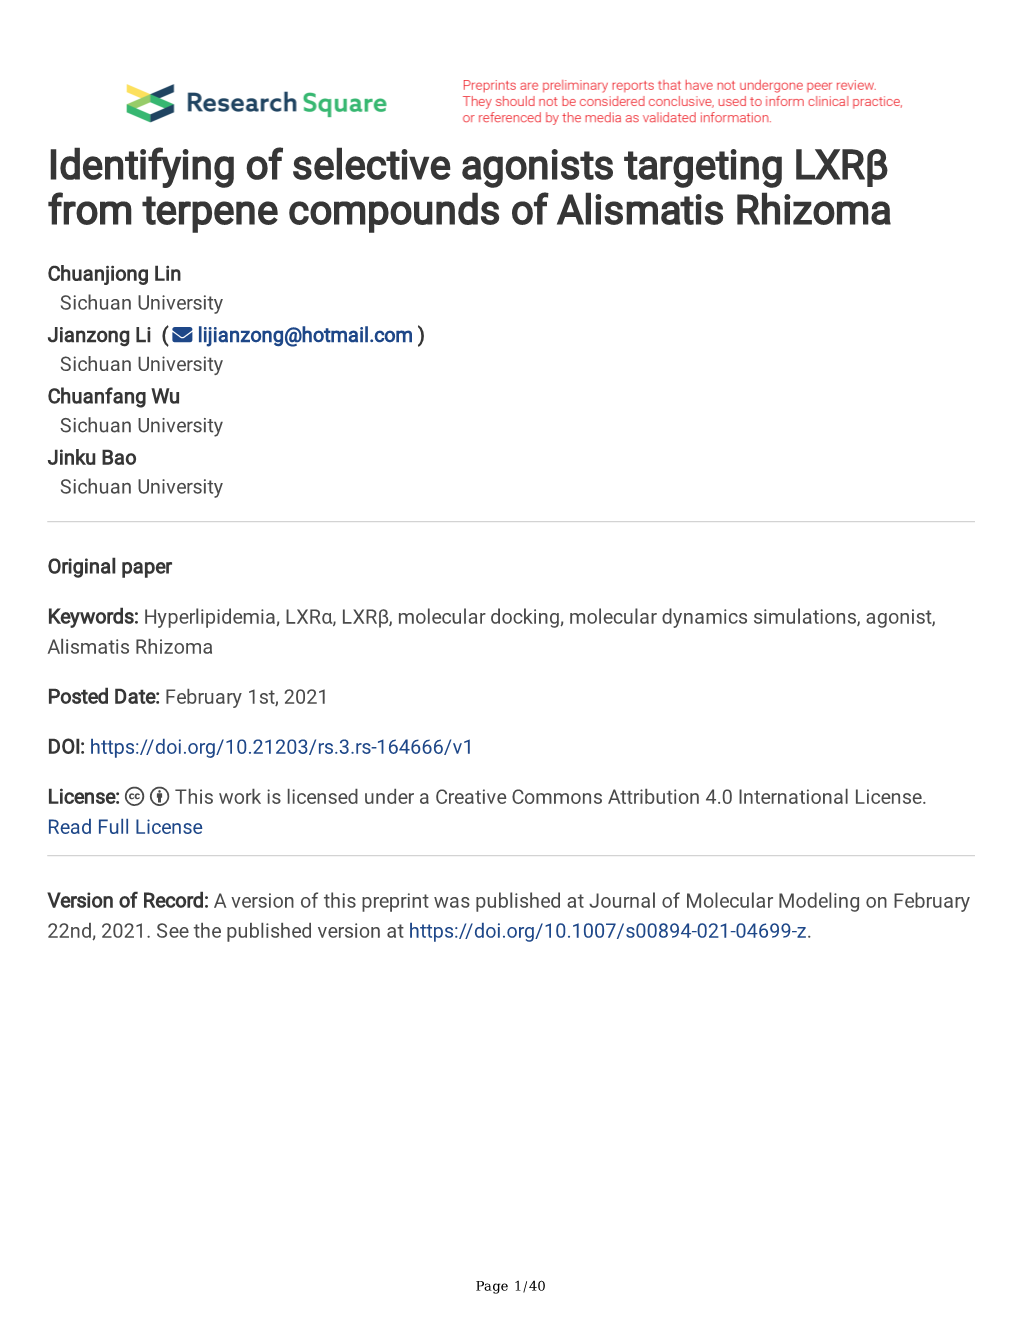 Identifying of Selective Agonists Targeting Lxrβ from Terpene Compounds of Alismatis Rhizoma